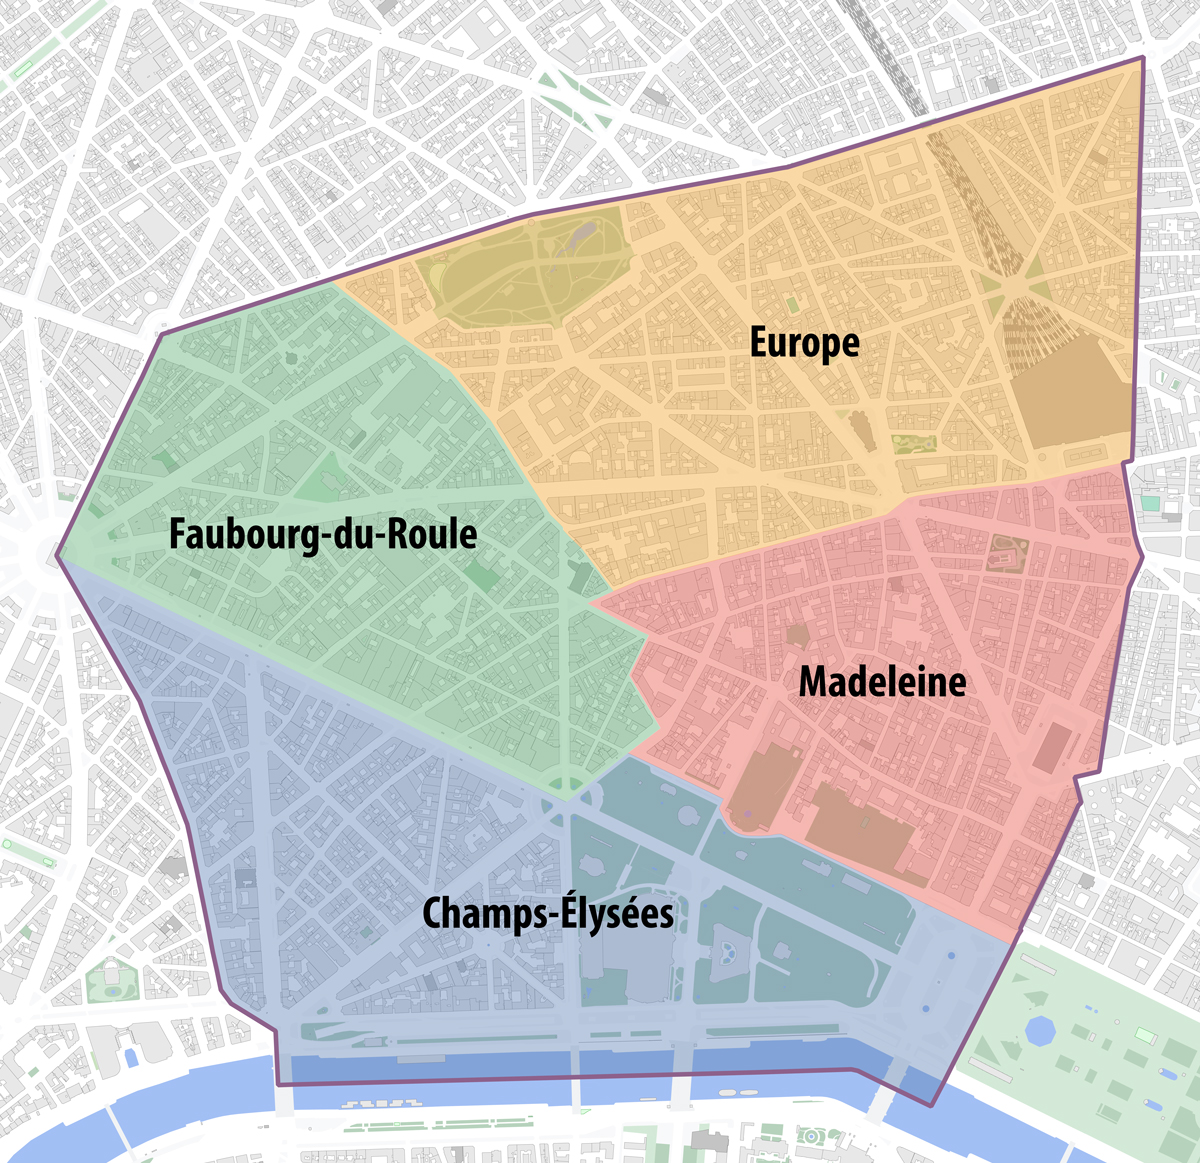 The 4 districts of the 8th arrt © Paris 16 - licence [CC BY-SA 4.0] from Wikimedia Commons